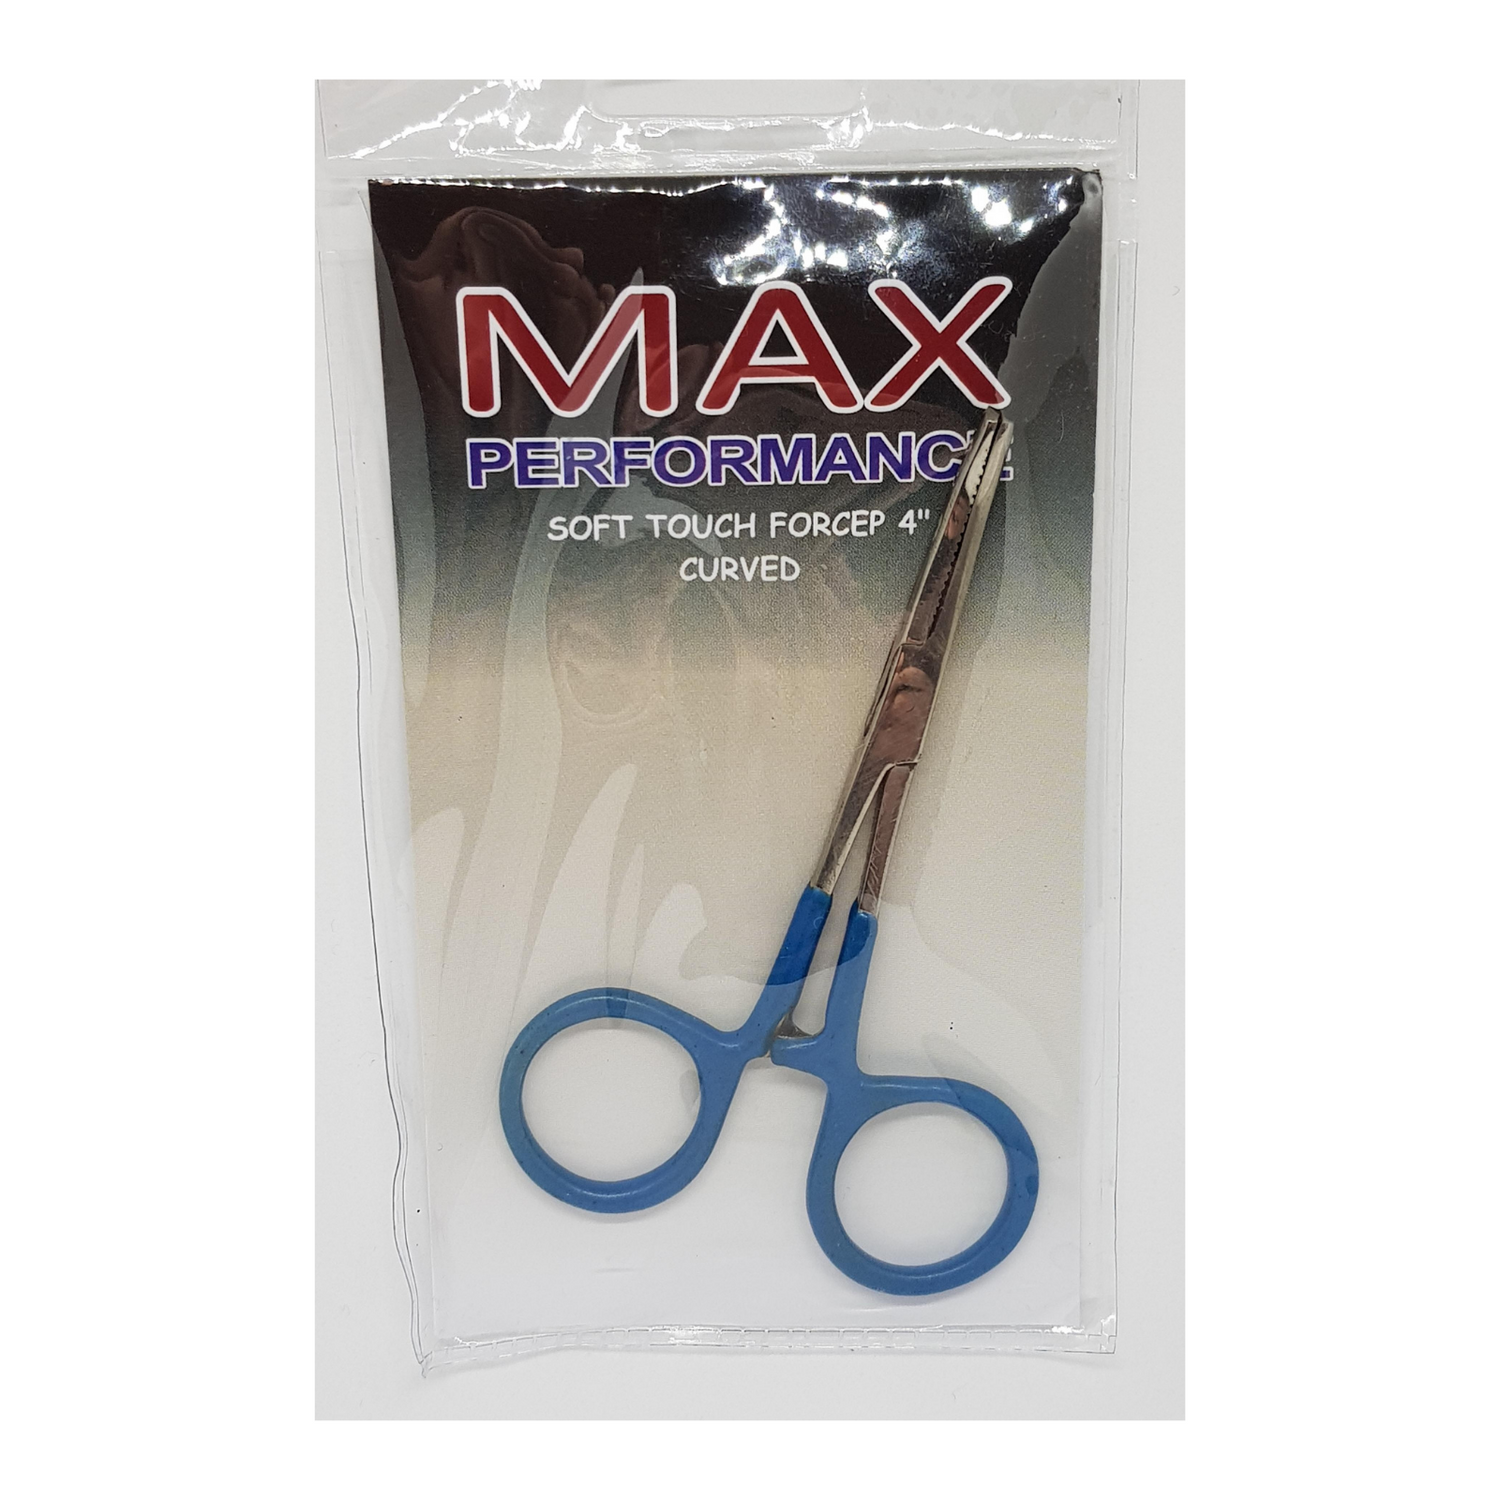 4 inch curved soft touch forceps.